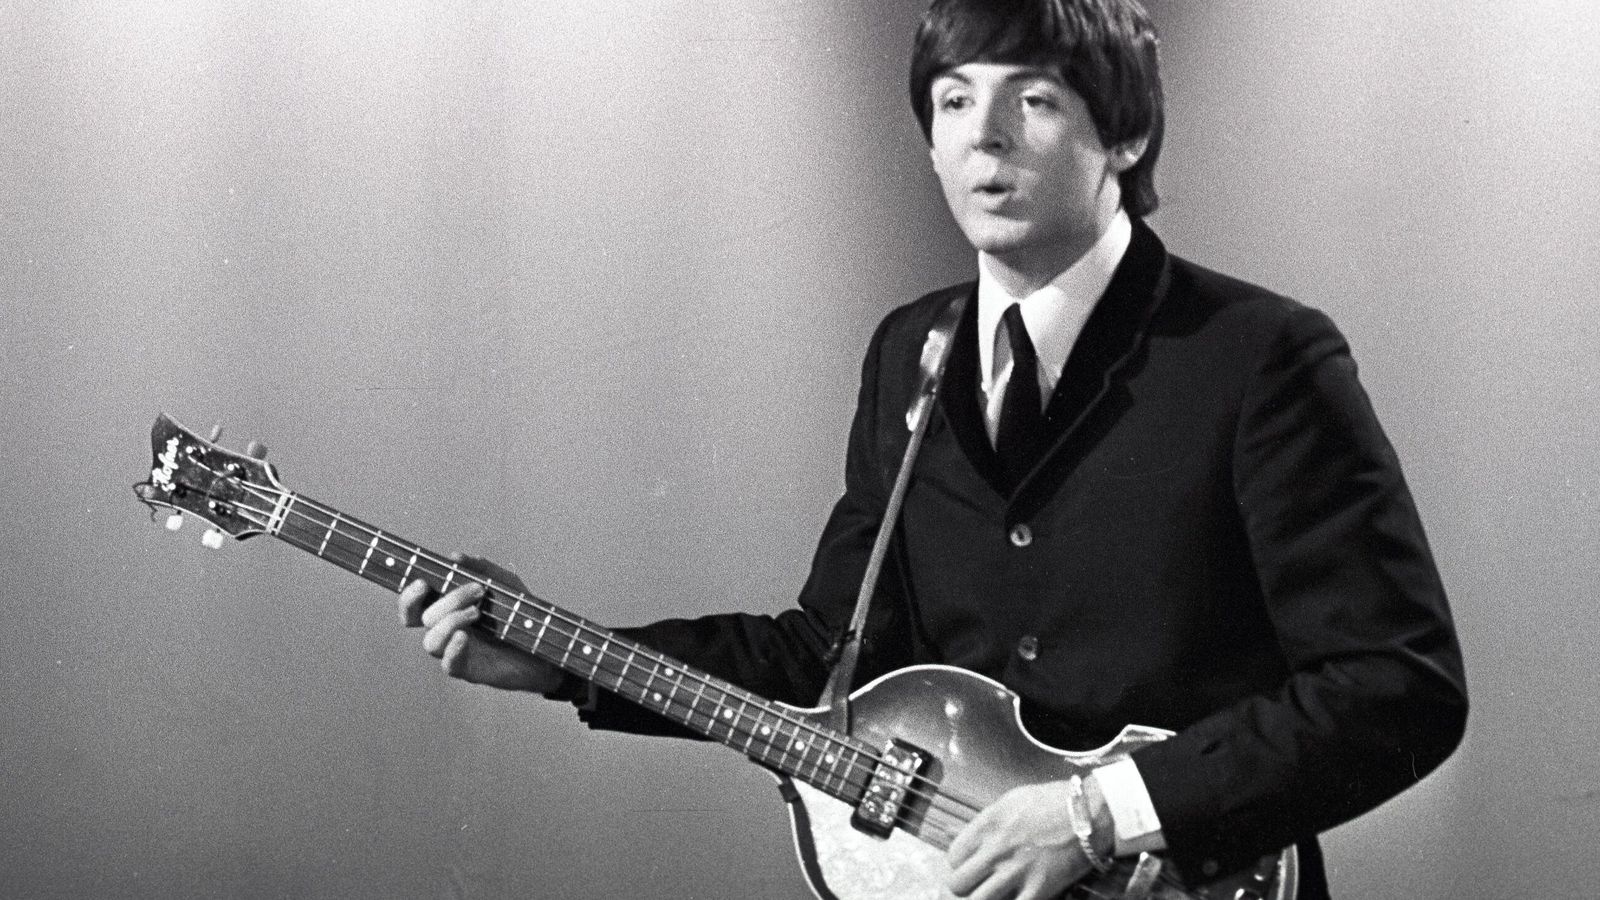 Sir Paul McCartney reunited with 'stolen' Hofner guitar after 50 years thanks to search driven by The Lost Bass Project